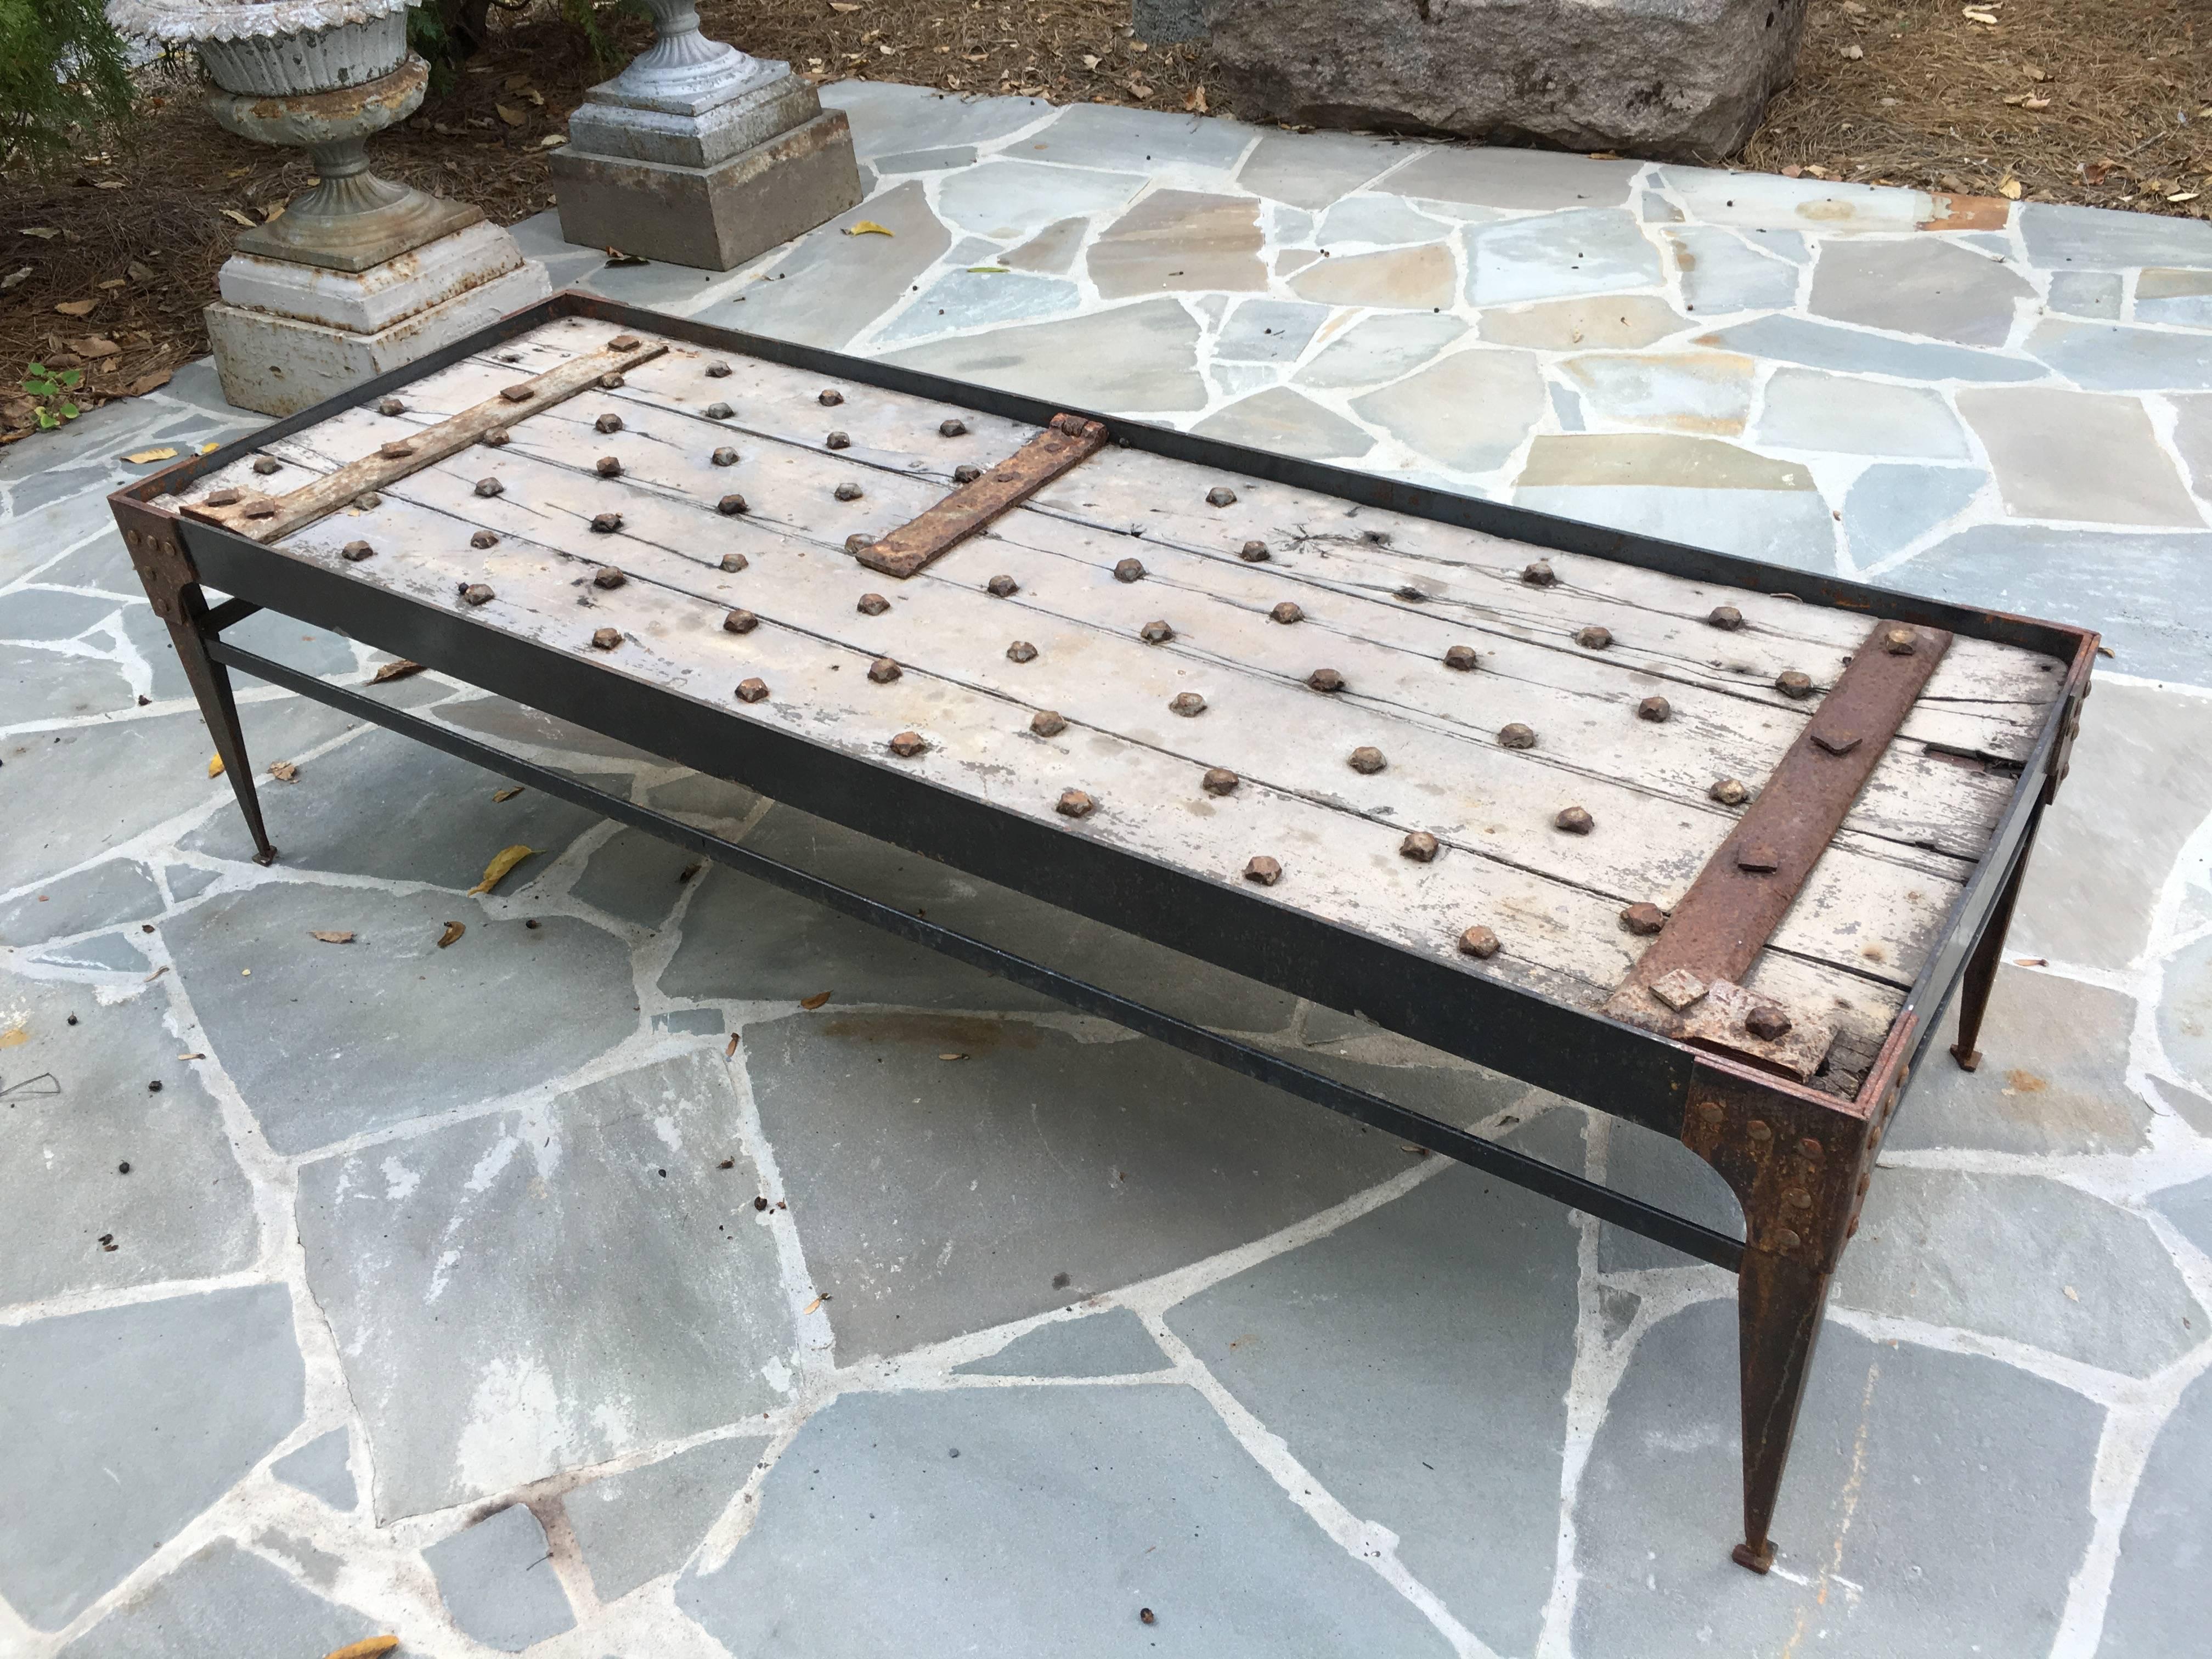 Incredible 18th century French door newly made into a coffee table with riveted iron. Door fits just below the surface so a glass top may be added.